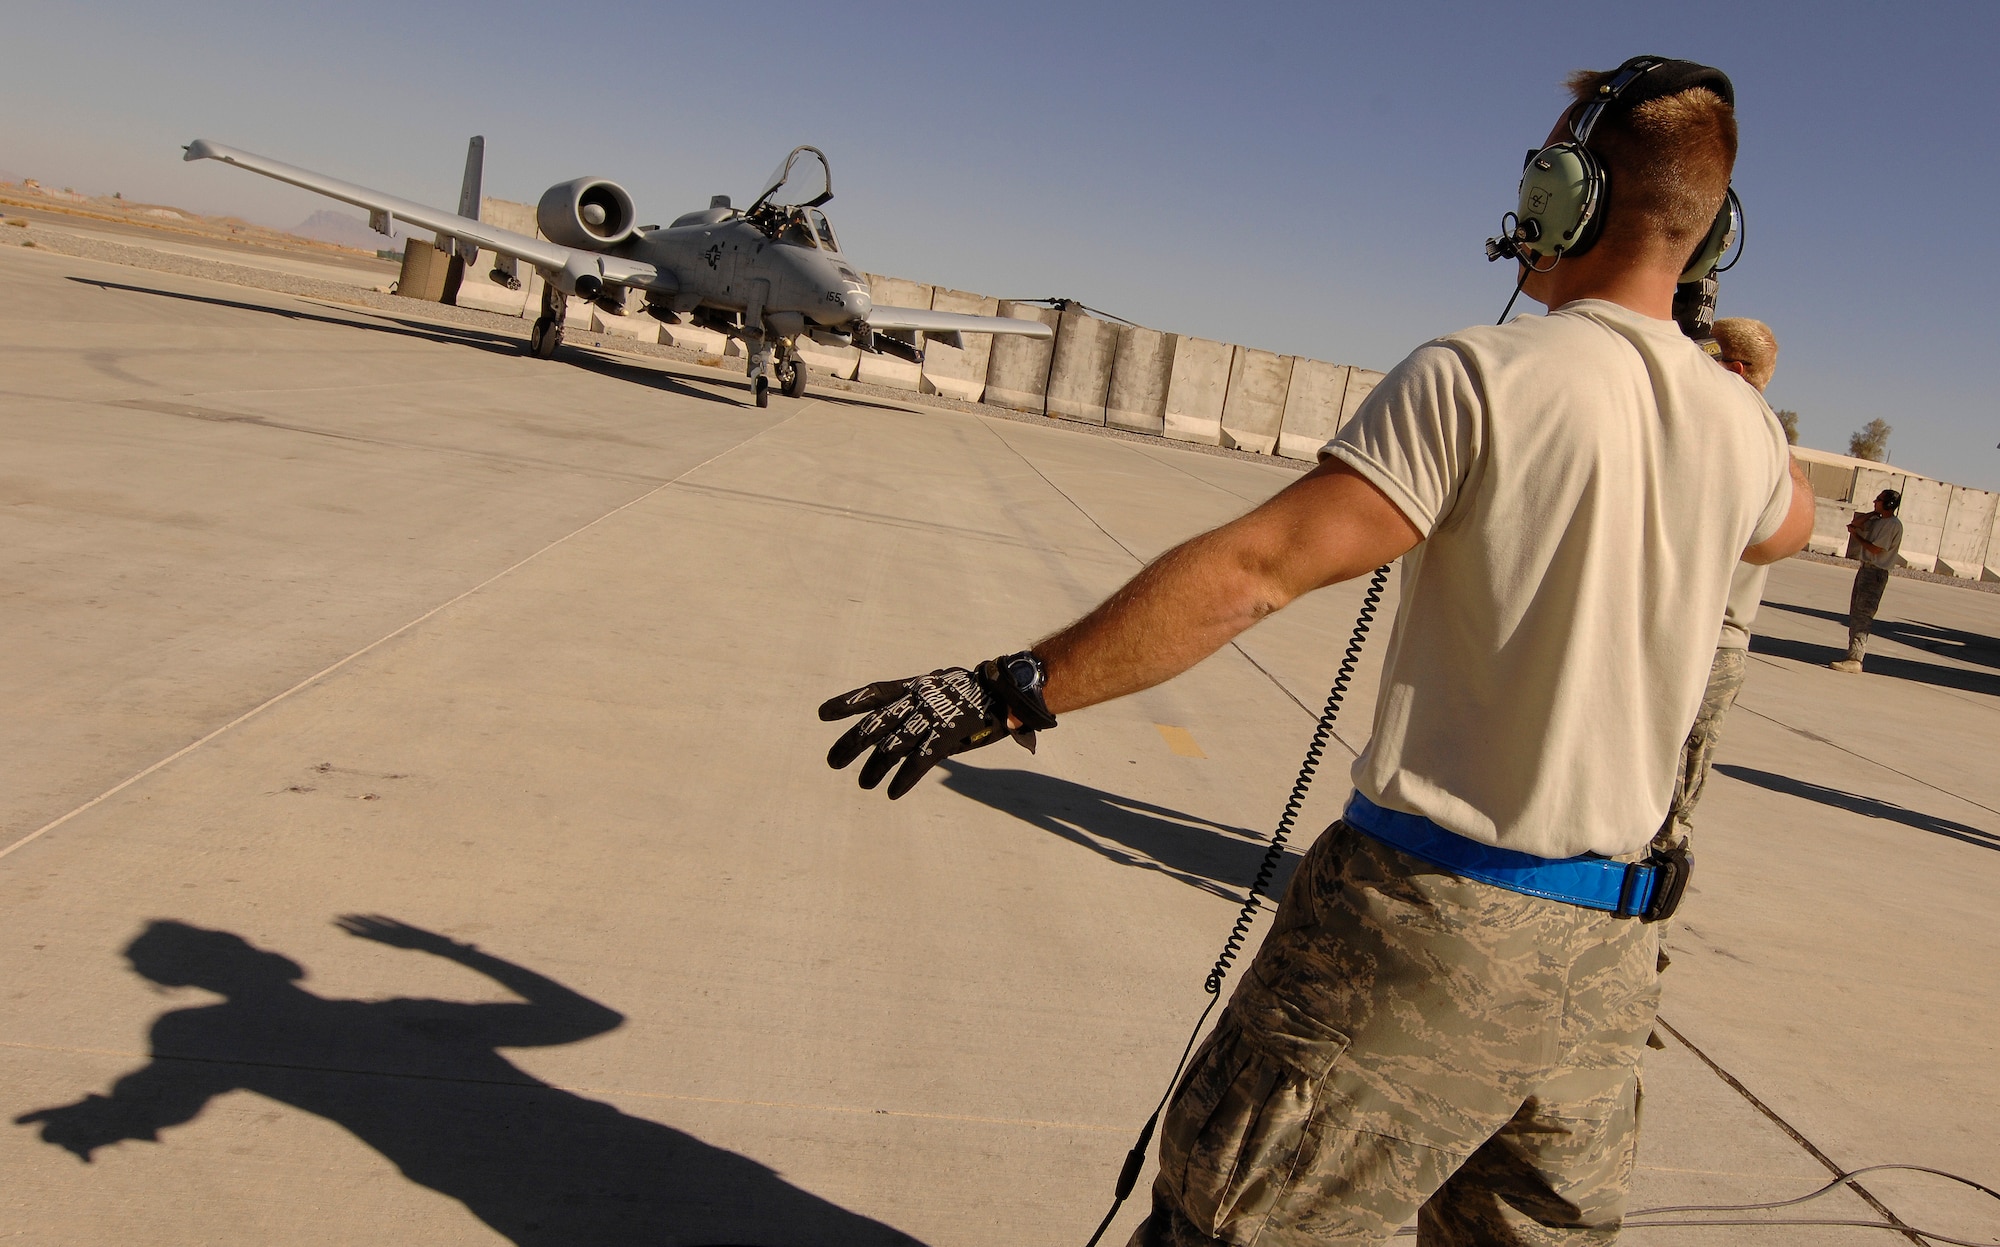 Staff Sgt. Christopher Zermer, 451st Expeditionary Aircraft Maintenance Squadron, guides an A-10 Thunderbolt II at Kandahar Airfield, Afghanistan, Jan. 1, 2010. (U.S. Air Force photo by Staff Sgt. Dayton Mitchell/Released)